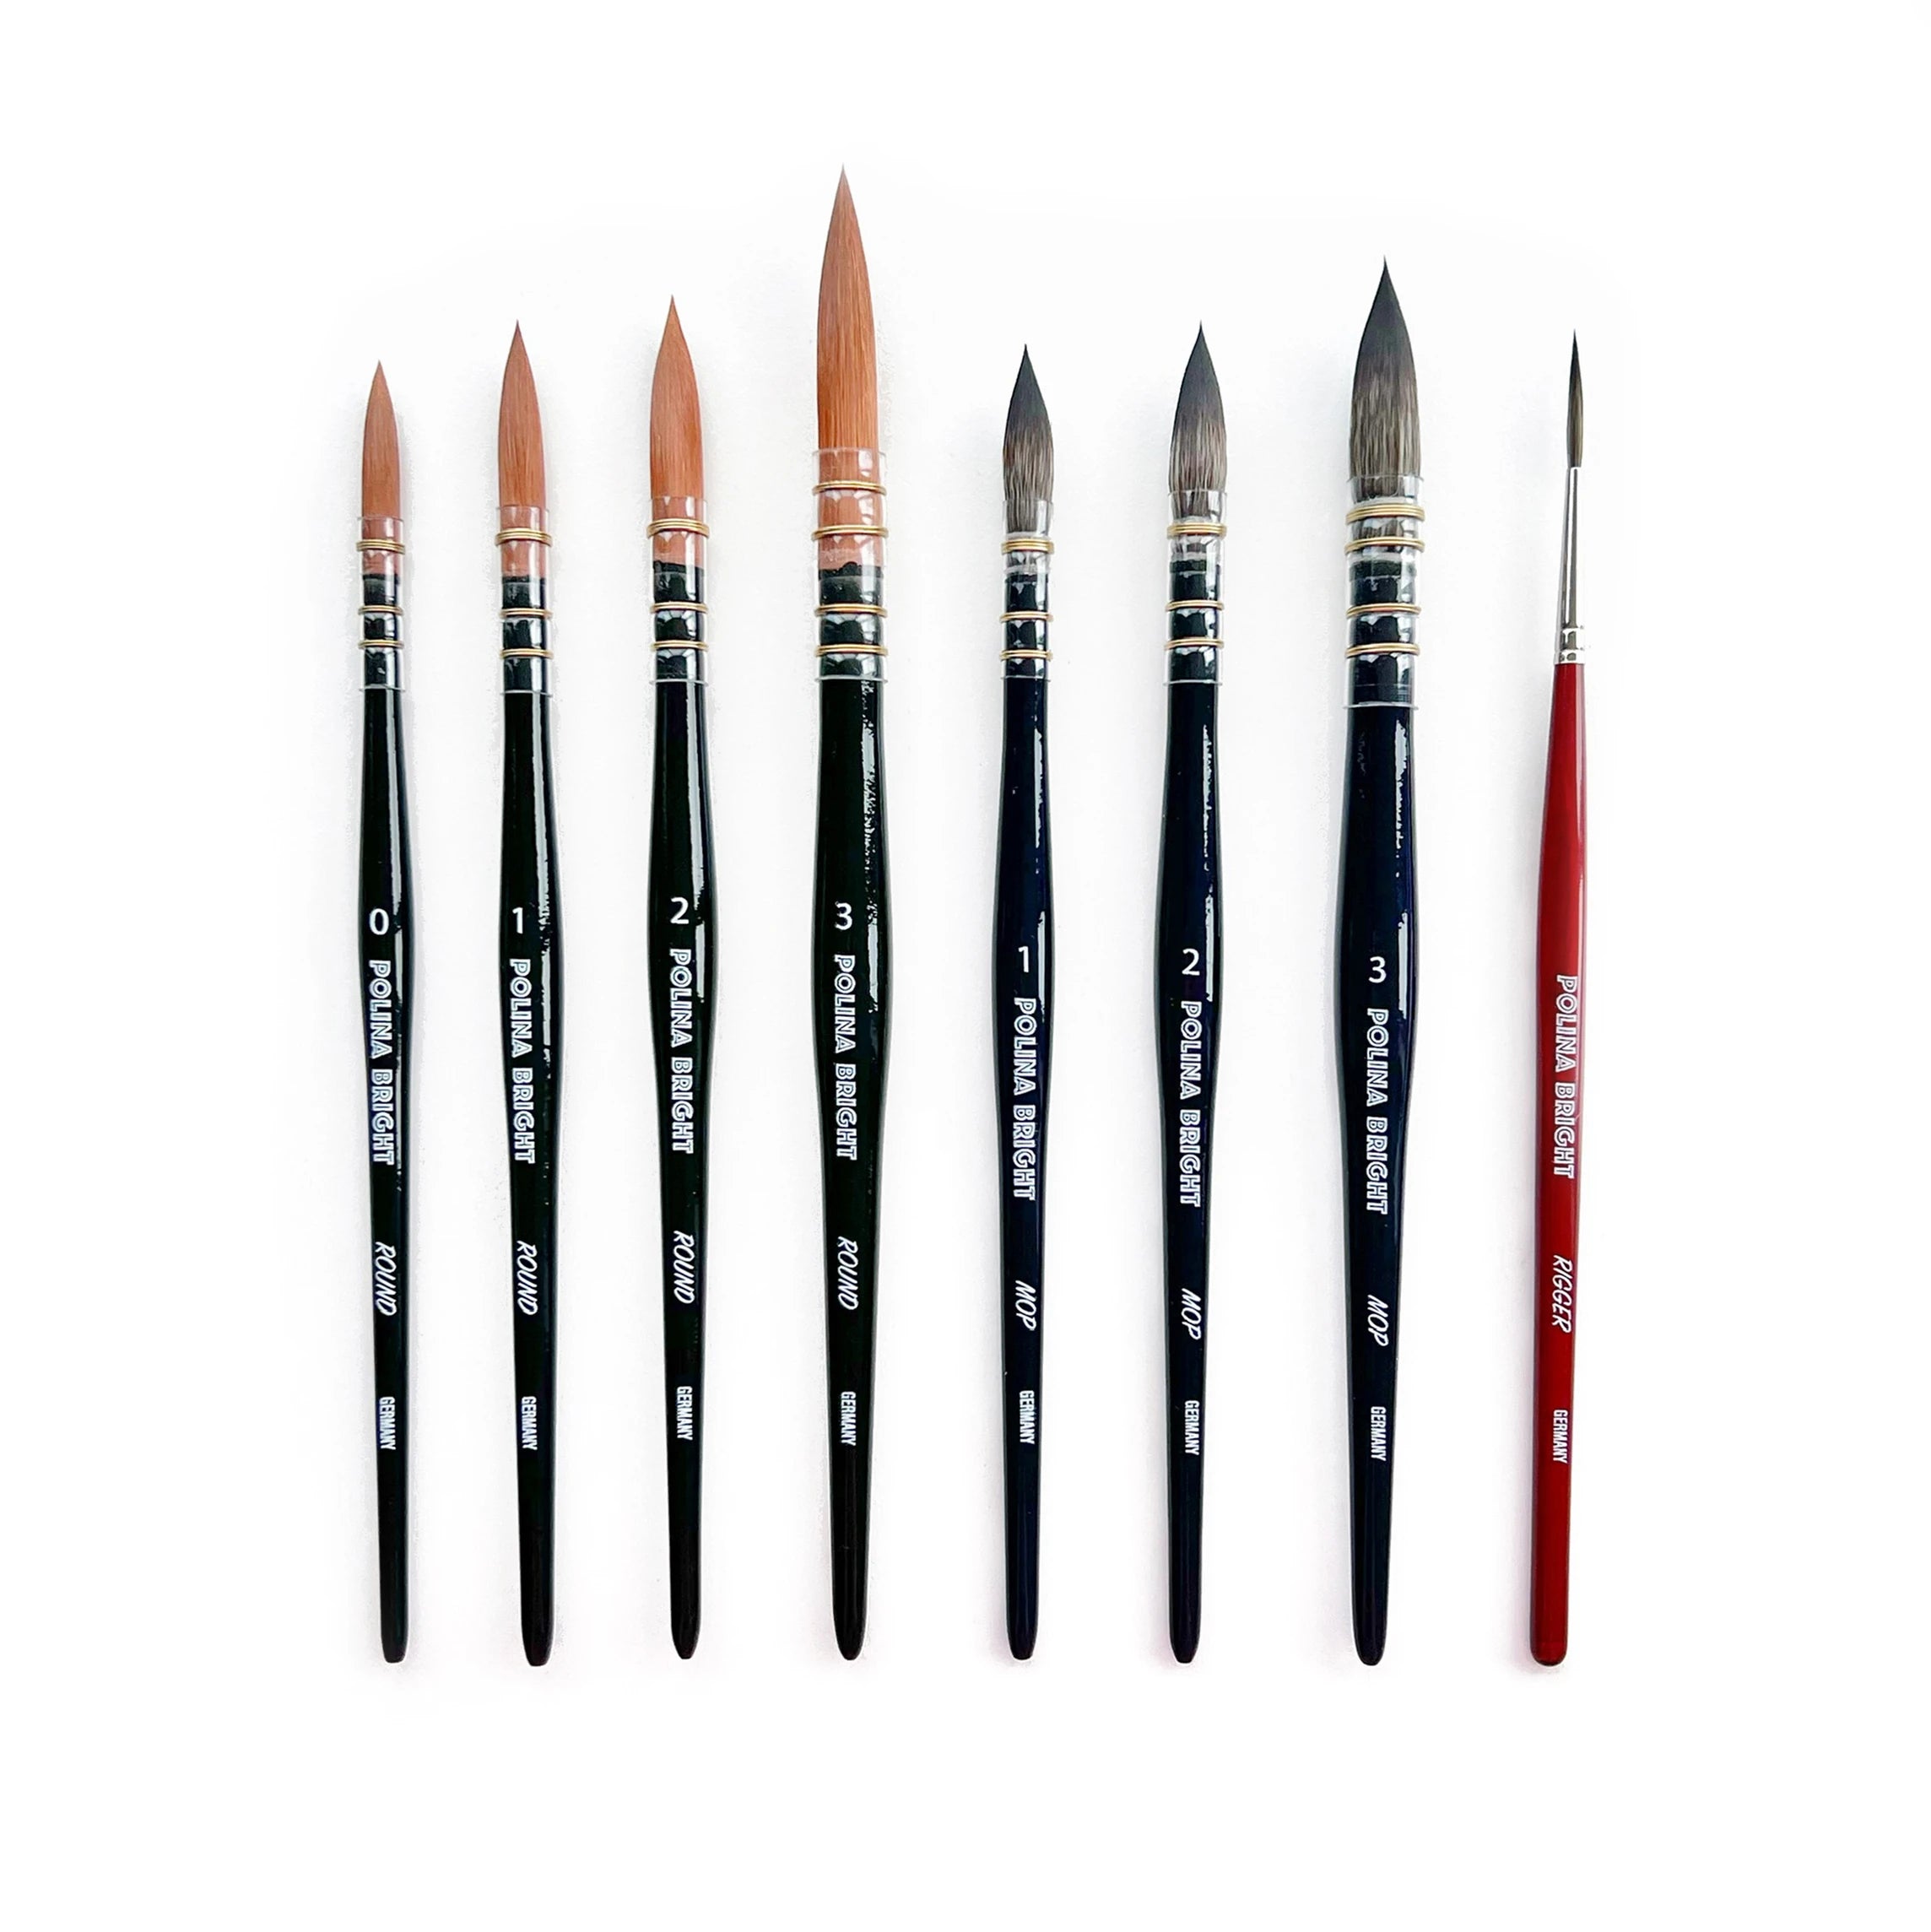 All Polina Bright brushes - Mop, Round and Rigger watercolor brushes